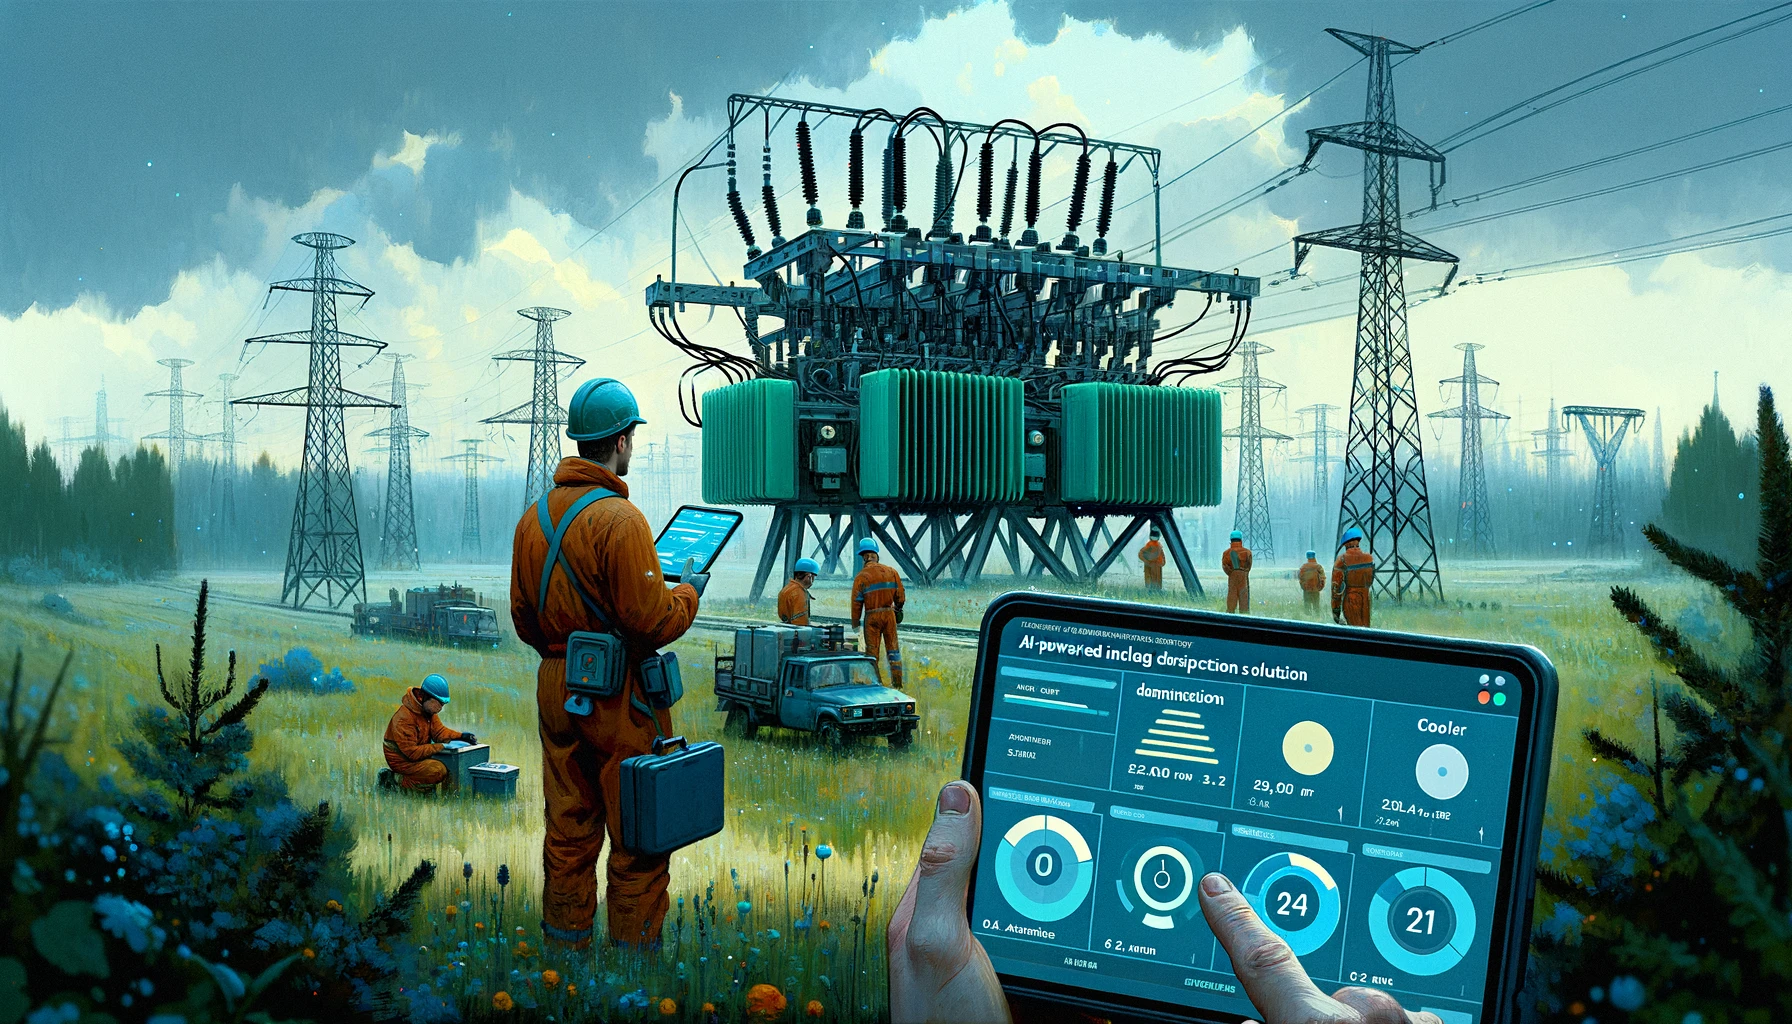 Here's the illustration for the article, now depicted in cooler tones of green and blue to emphasize a more technical and precise atmosphere. The scene features engineers in a field setting with power lines and transformers, using portable devices to interact with AI analytics under an overcast sky.